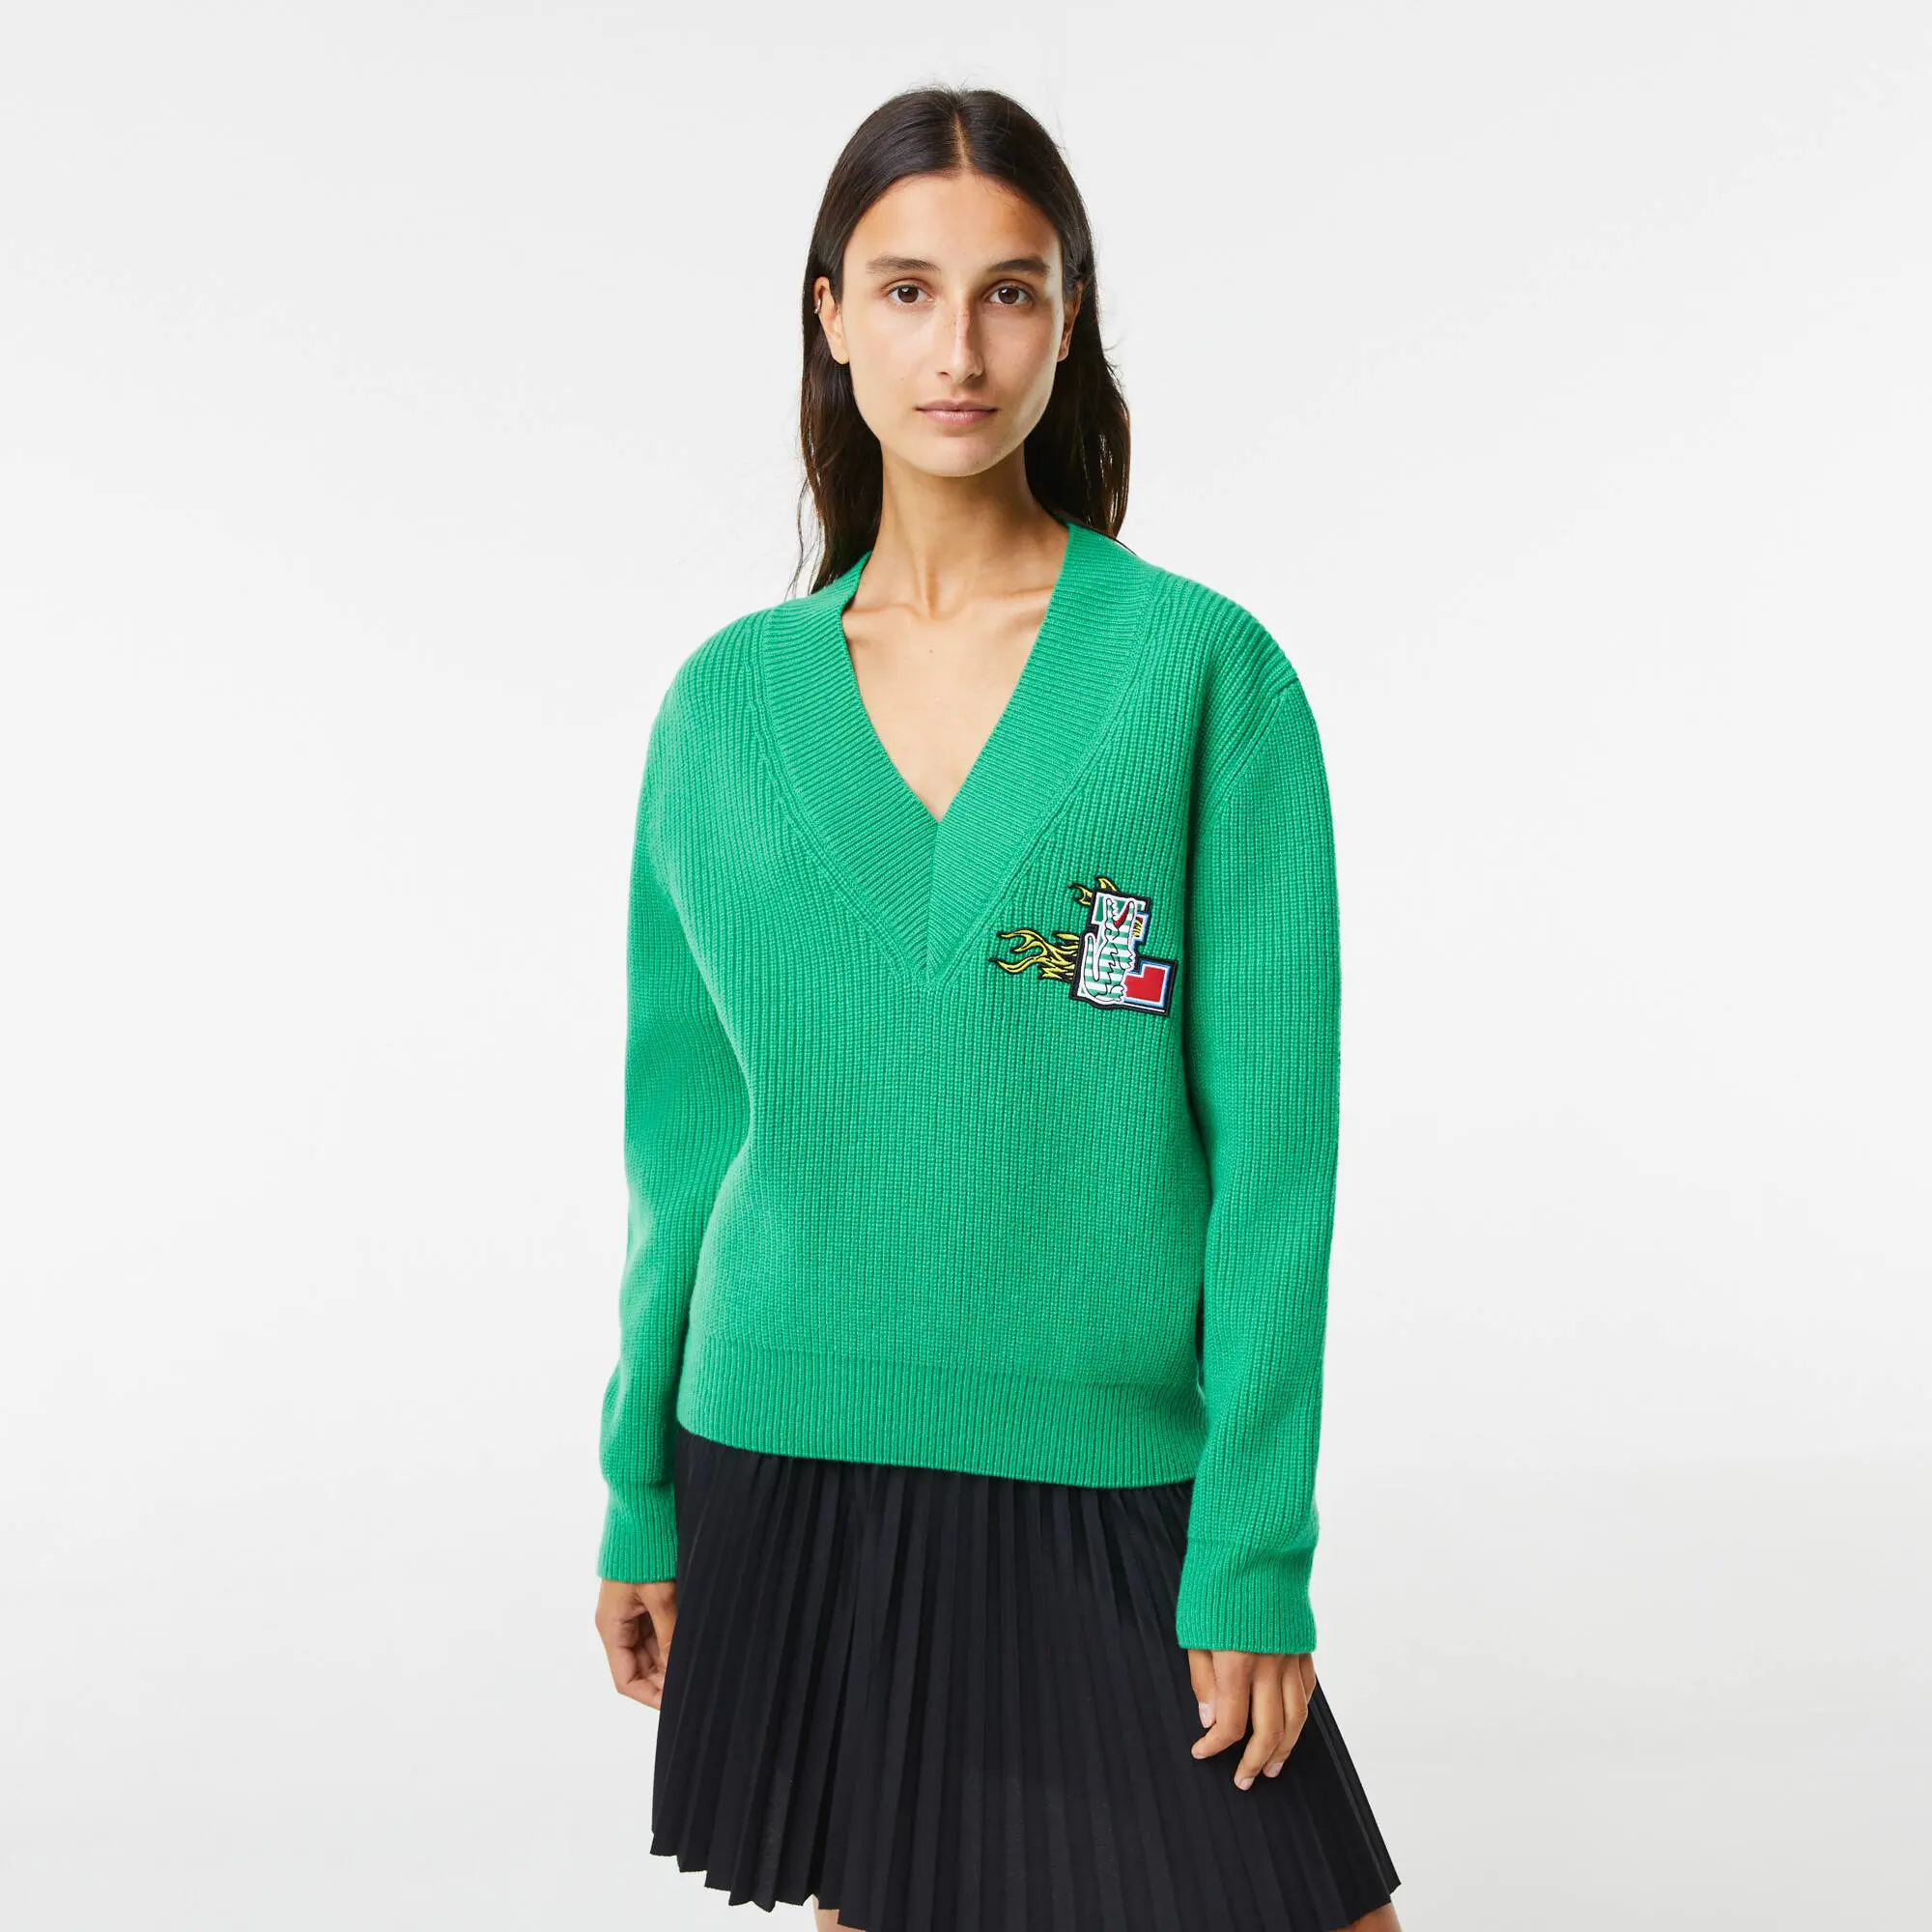 Lacoste Women's Lacoste Holiday V-Neck Wool Sweater. 1